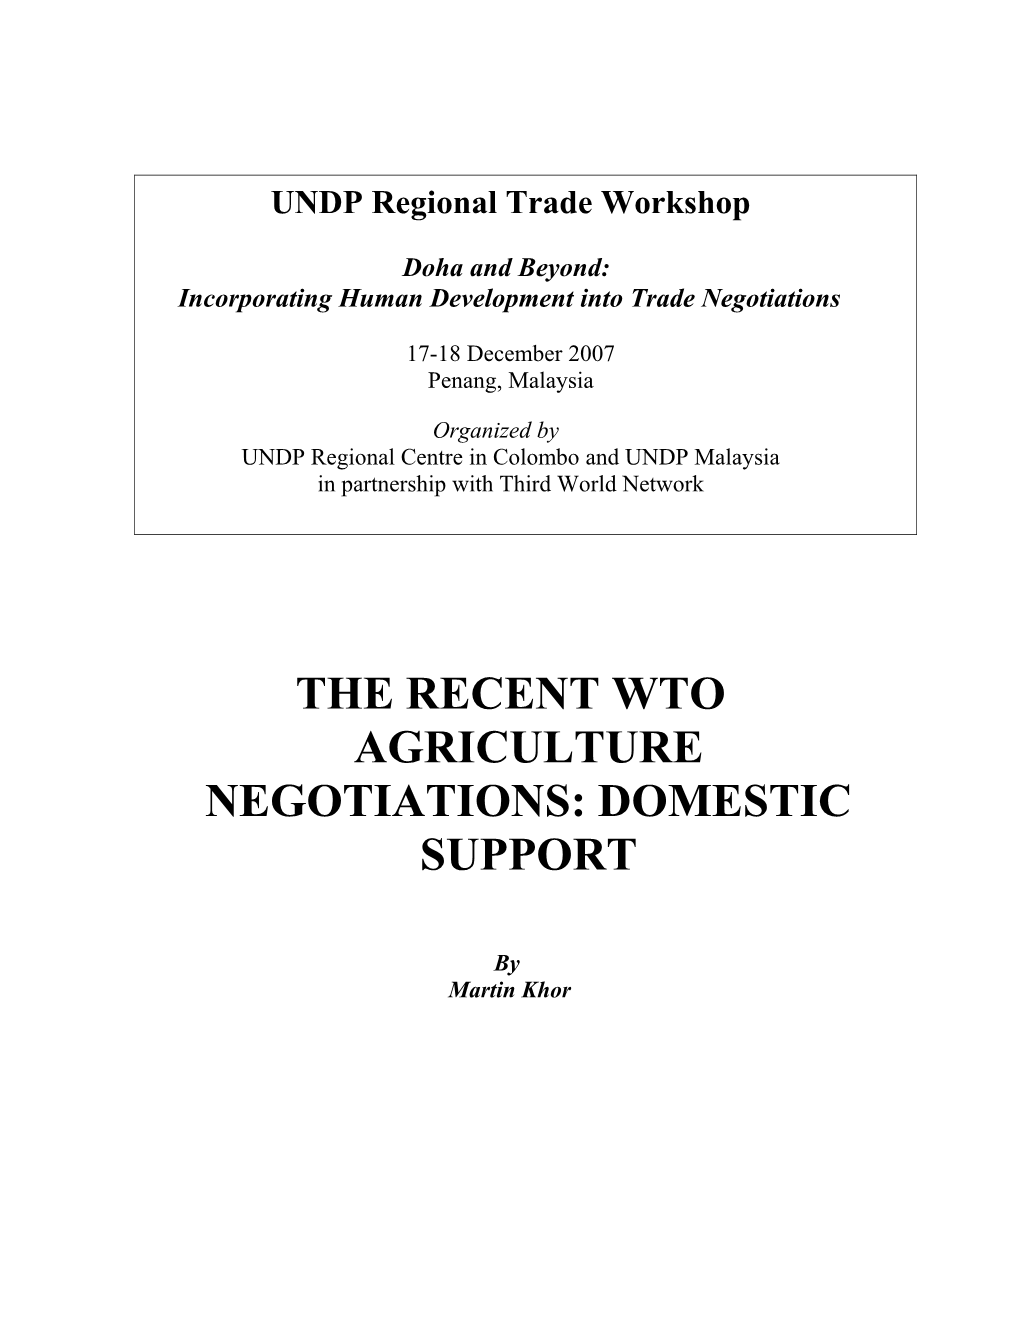 The Recent Wto Agriculture Negotiations: Domestic Support